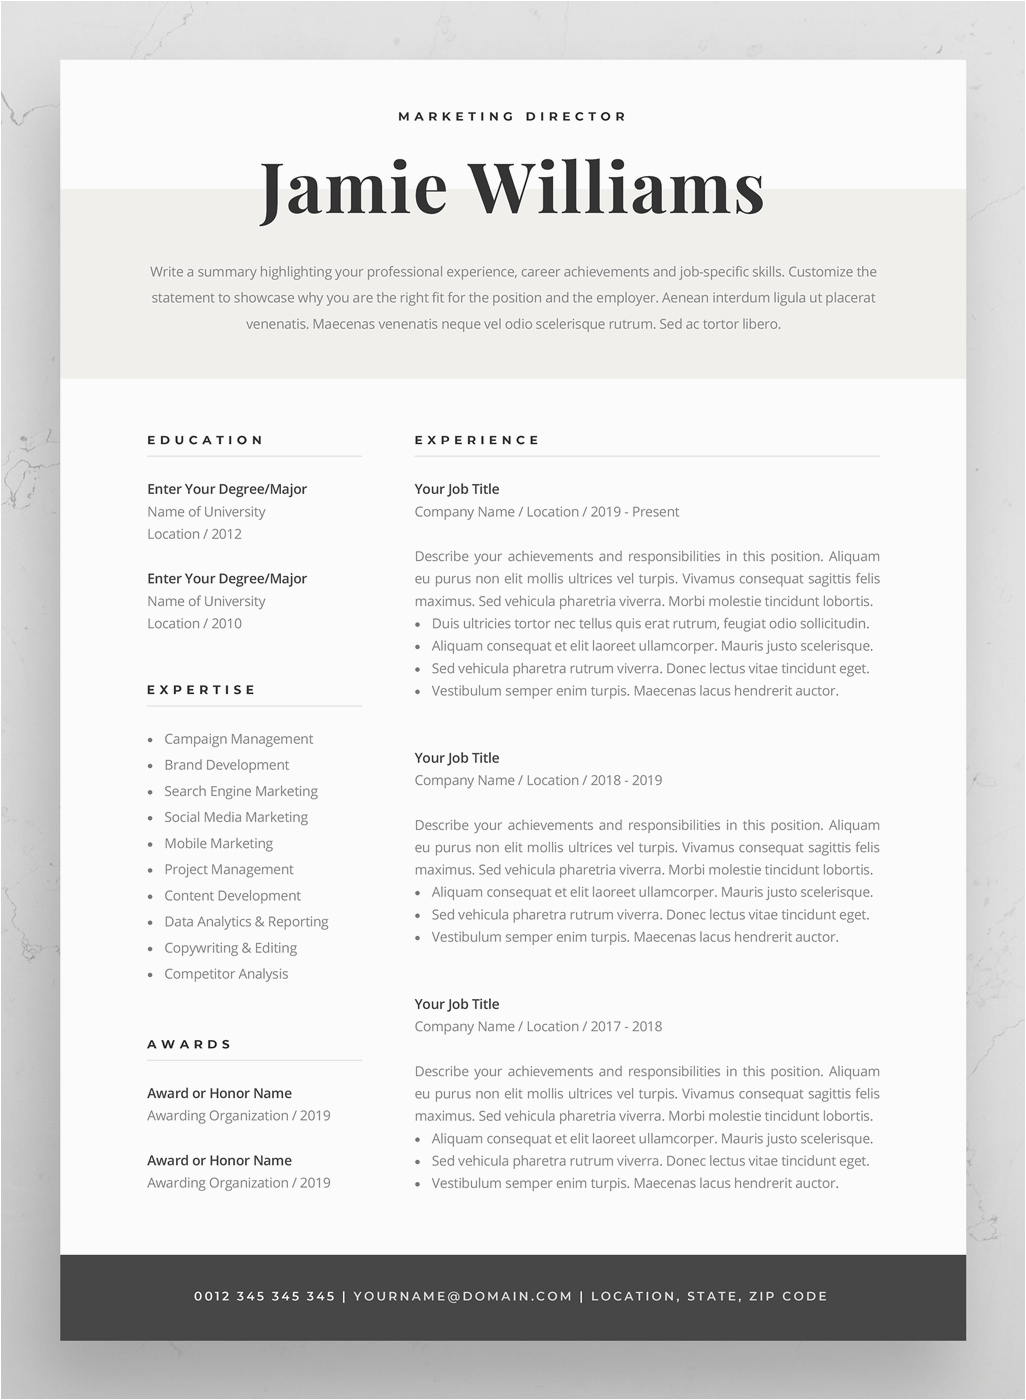 Free Modern Resume and Cover Letter Templates Simple Cover Letter Example Cv Template Modern Resume